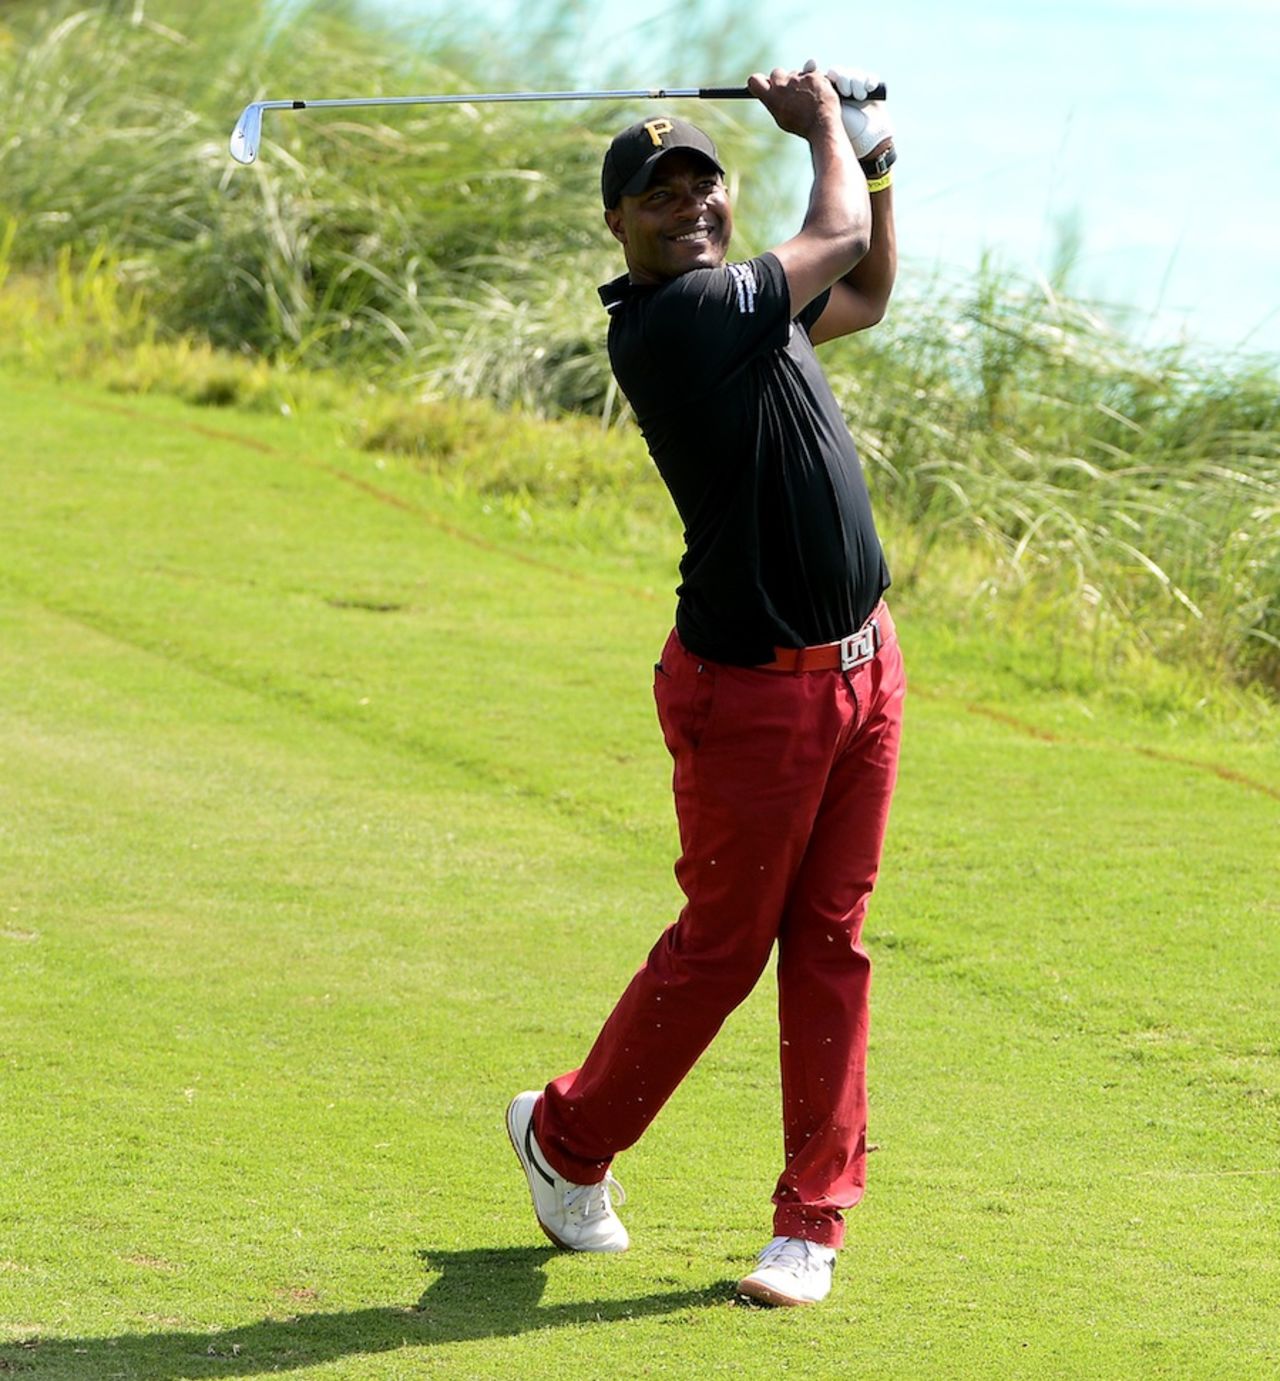 Brian Lara swings one over the top during a pro-am golf event, Bermuda, October 14, 2013